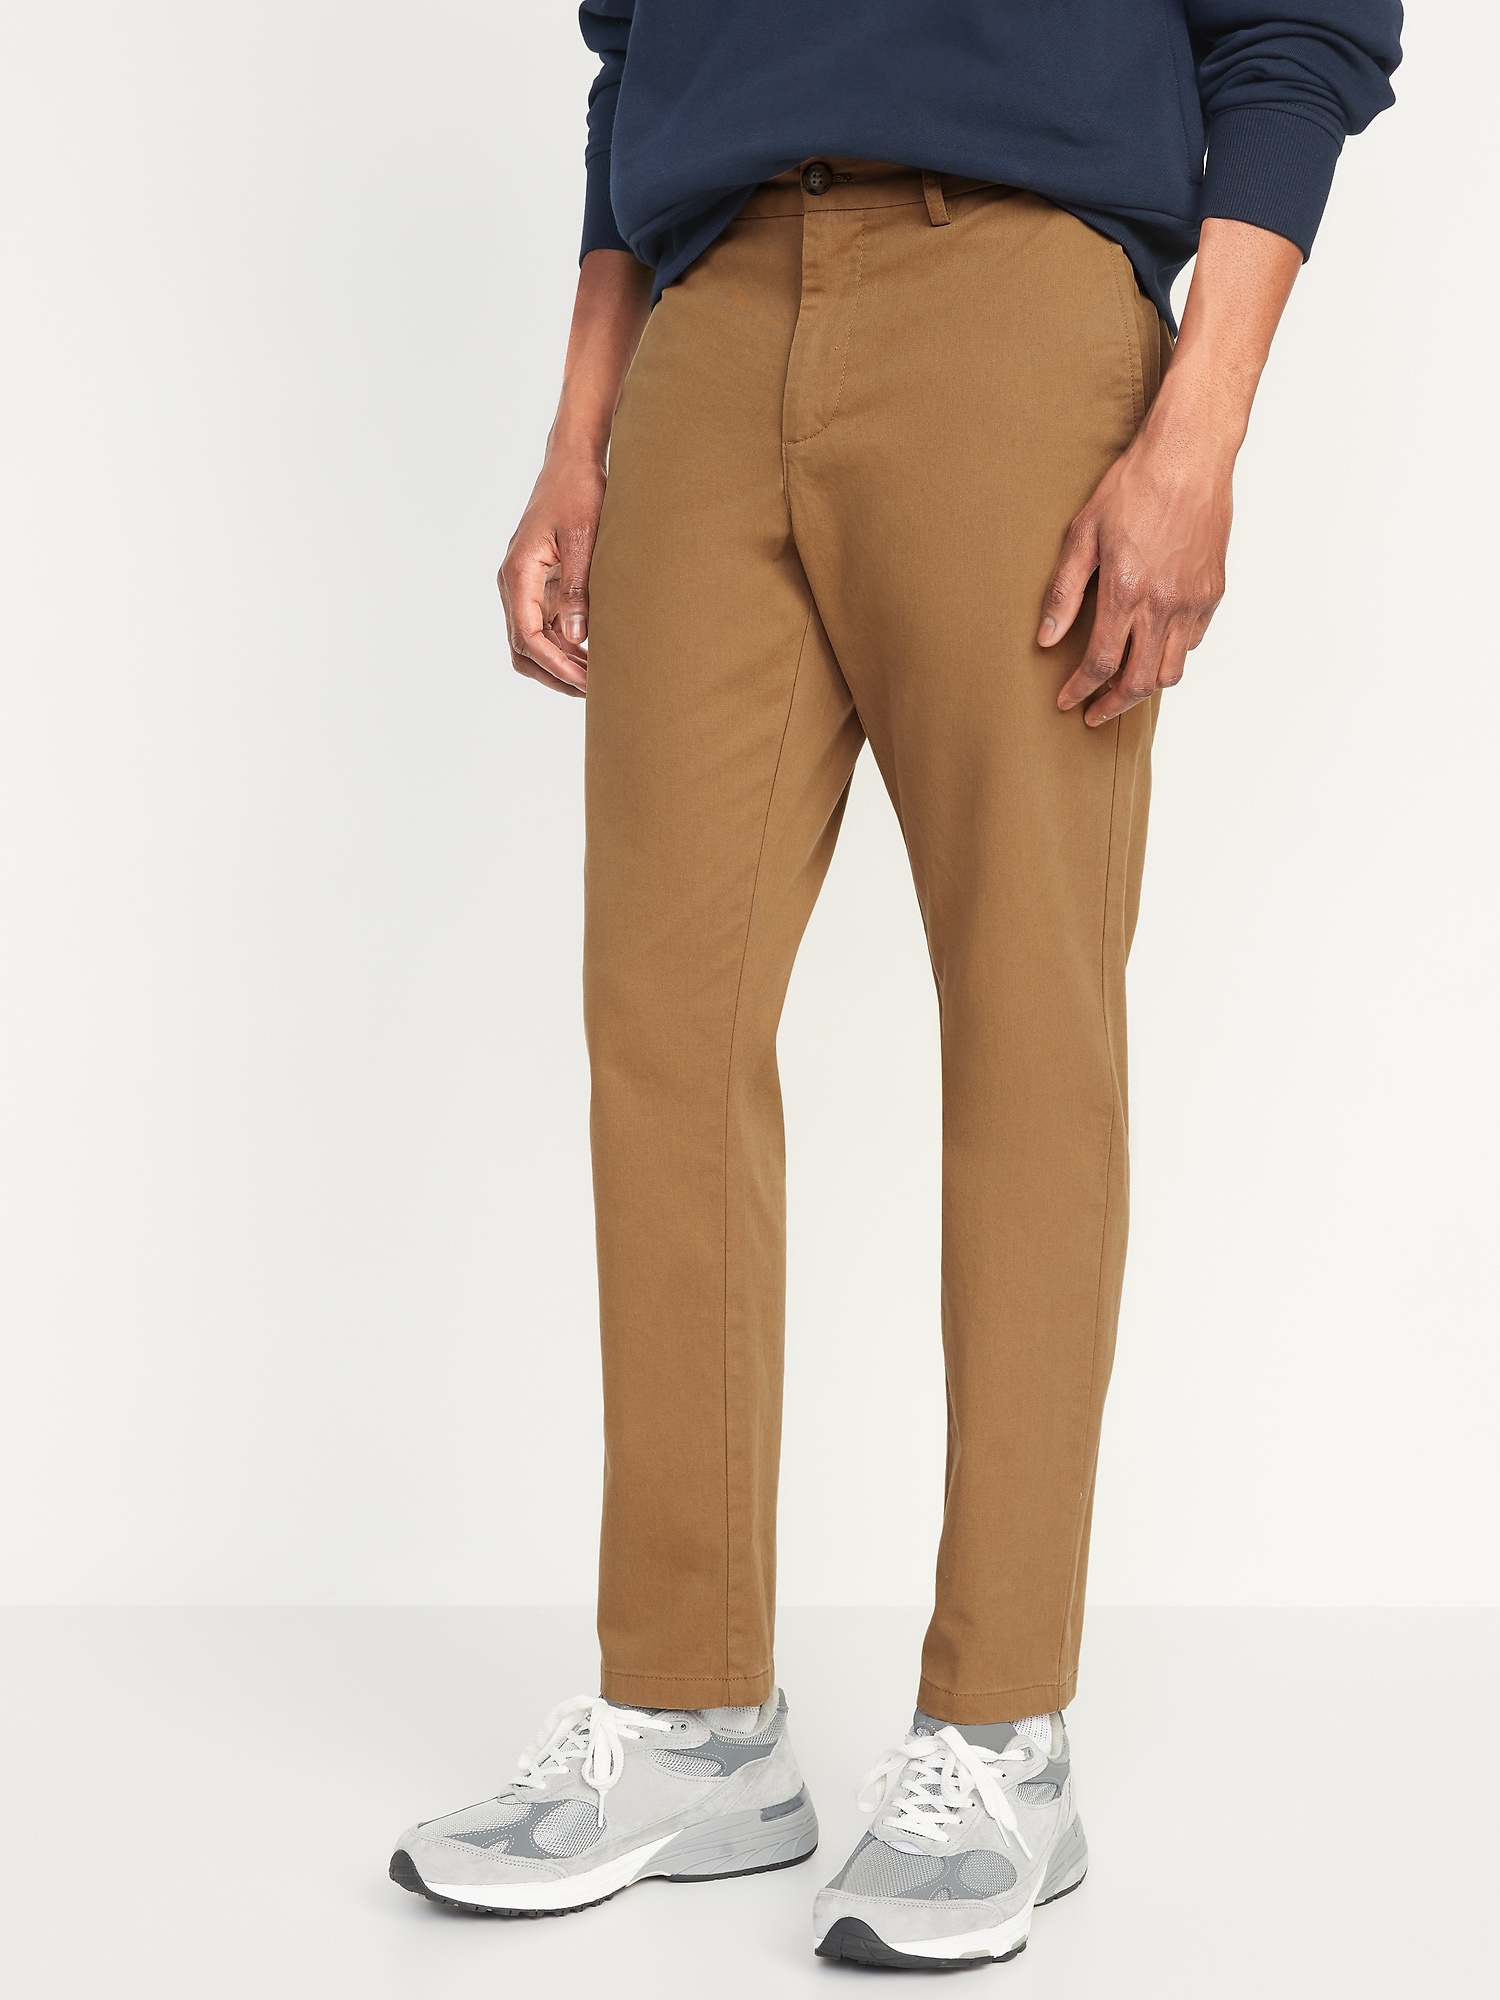 Old Navy Slim Built-In Flex Rotation Chino Pants brown. 1